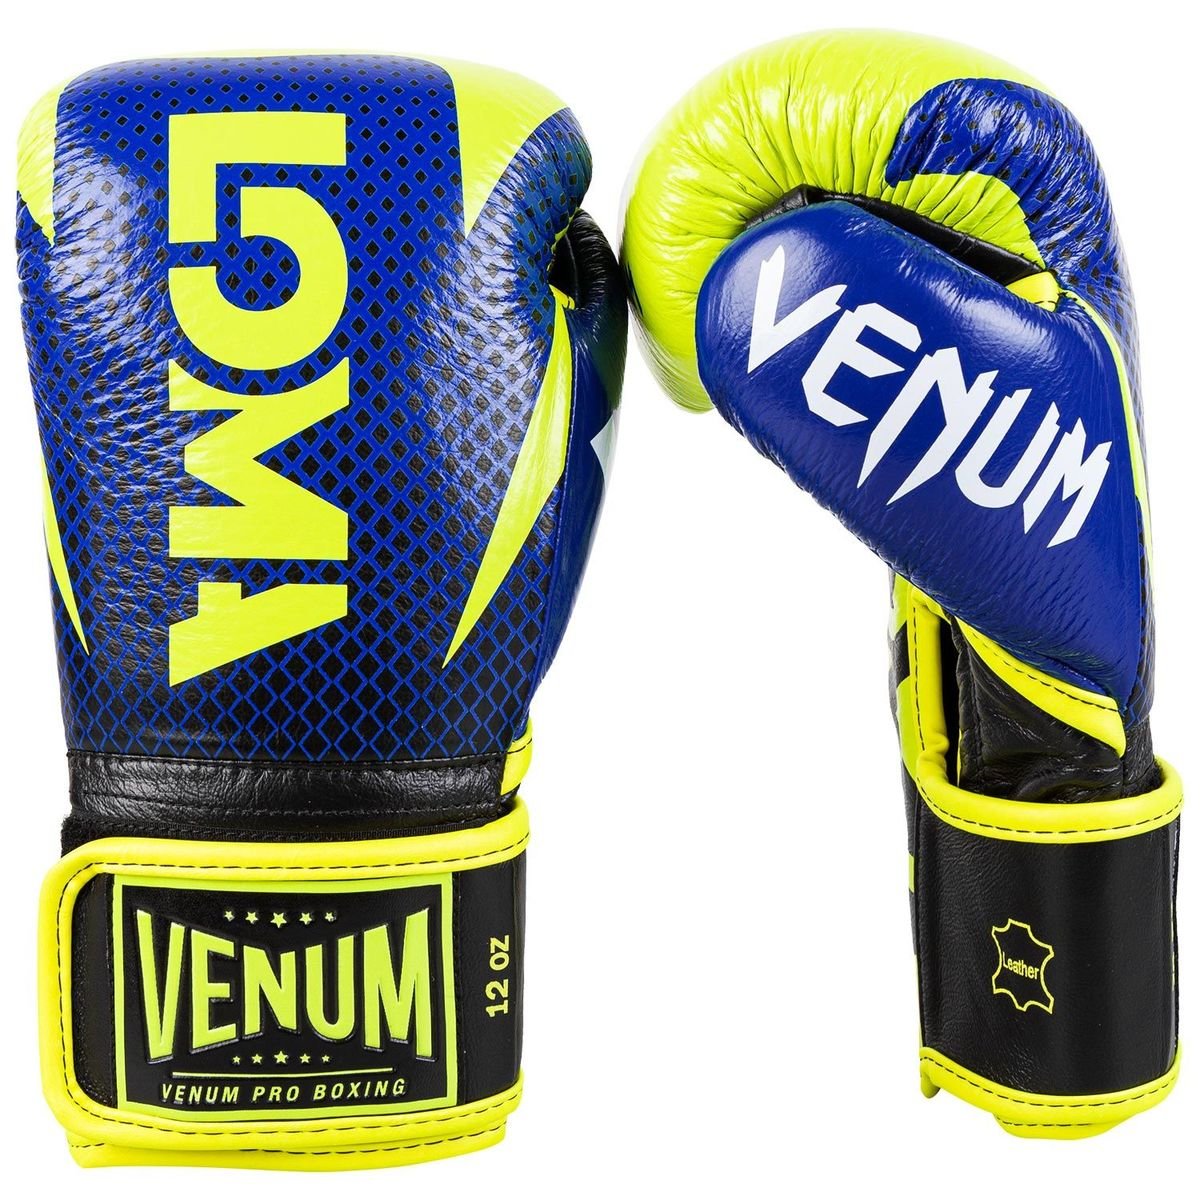 GLOVES THAI HAMMER MUAY LOMA BOXING EDITION VELCRO – PRO AAGsport VENUM-03912-405